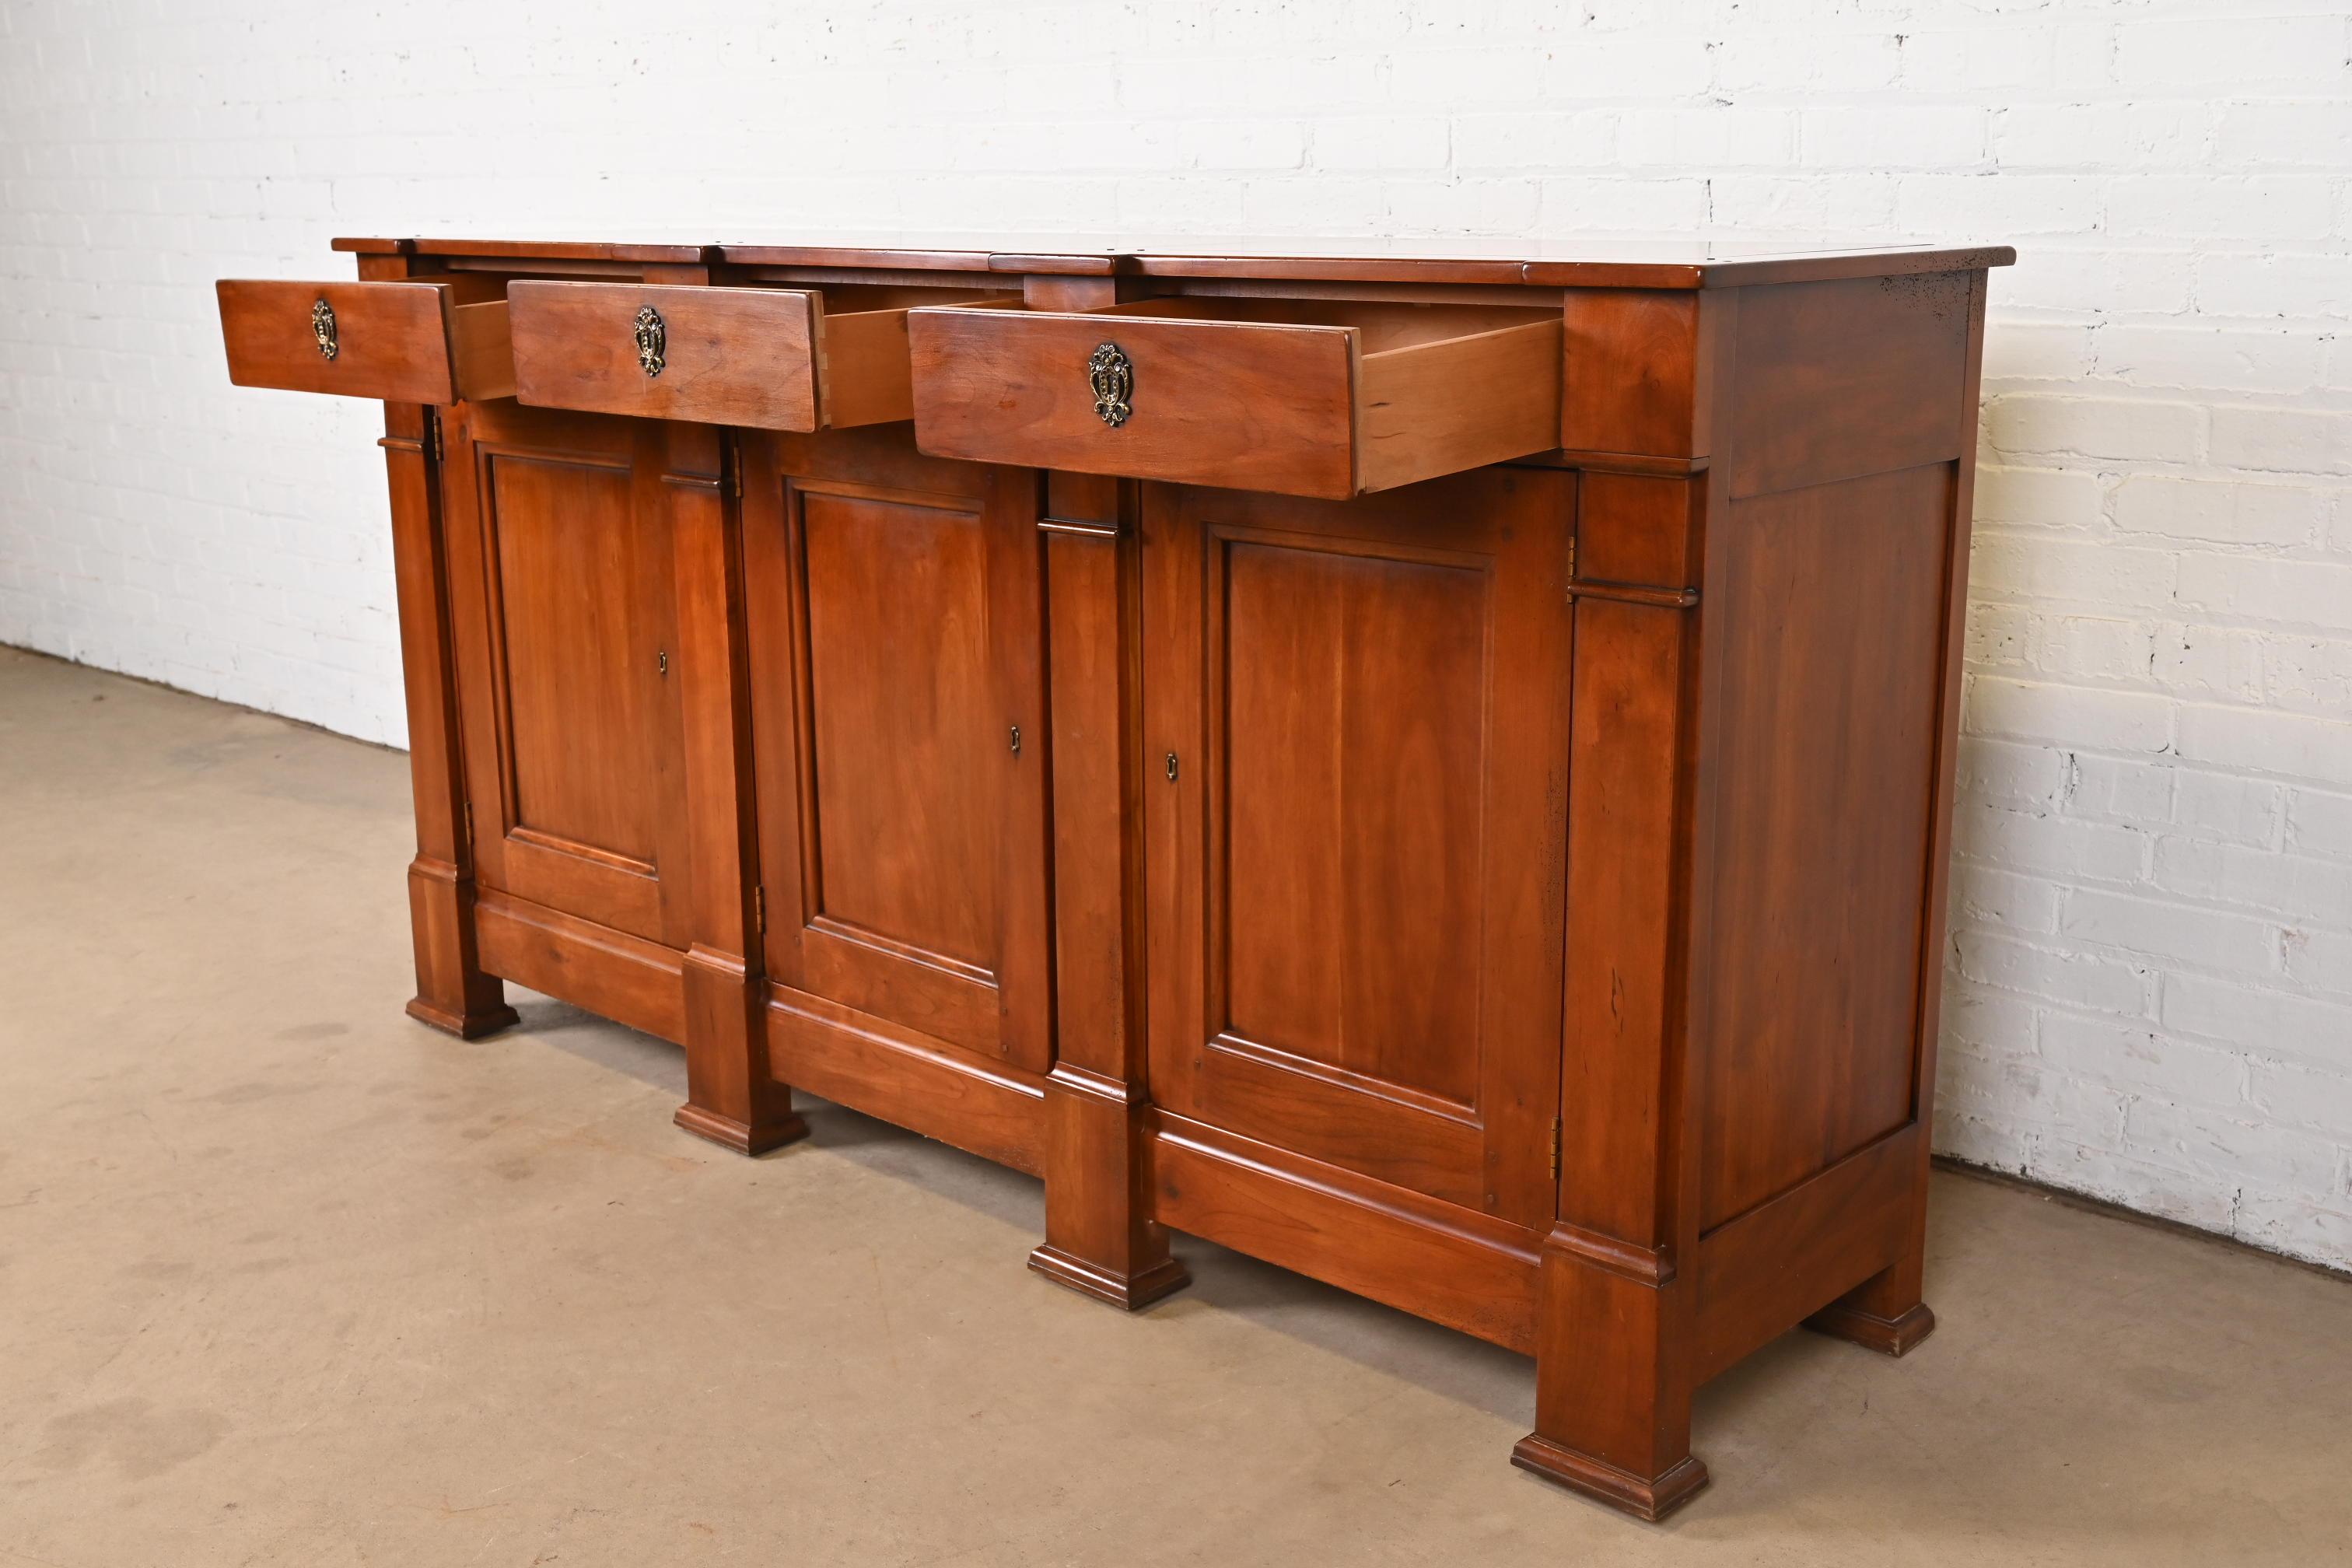 Henredon Italian Empire Carved Cherry Wood Sideboard or Bar Cabinet 2